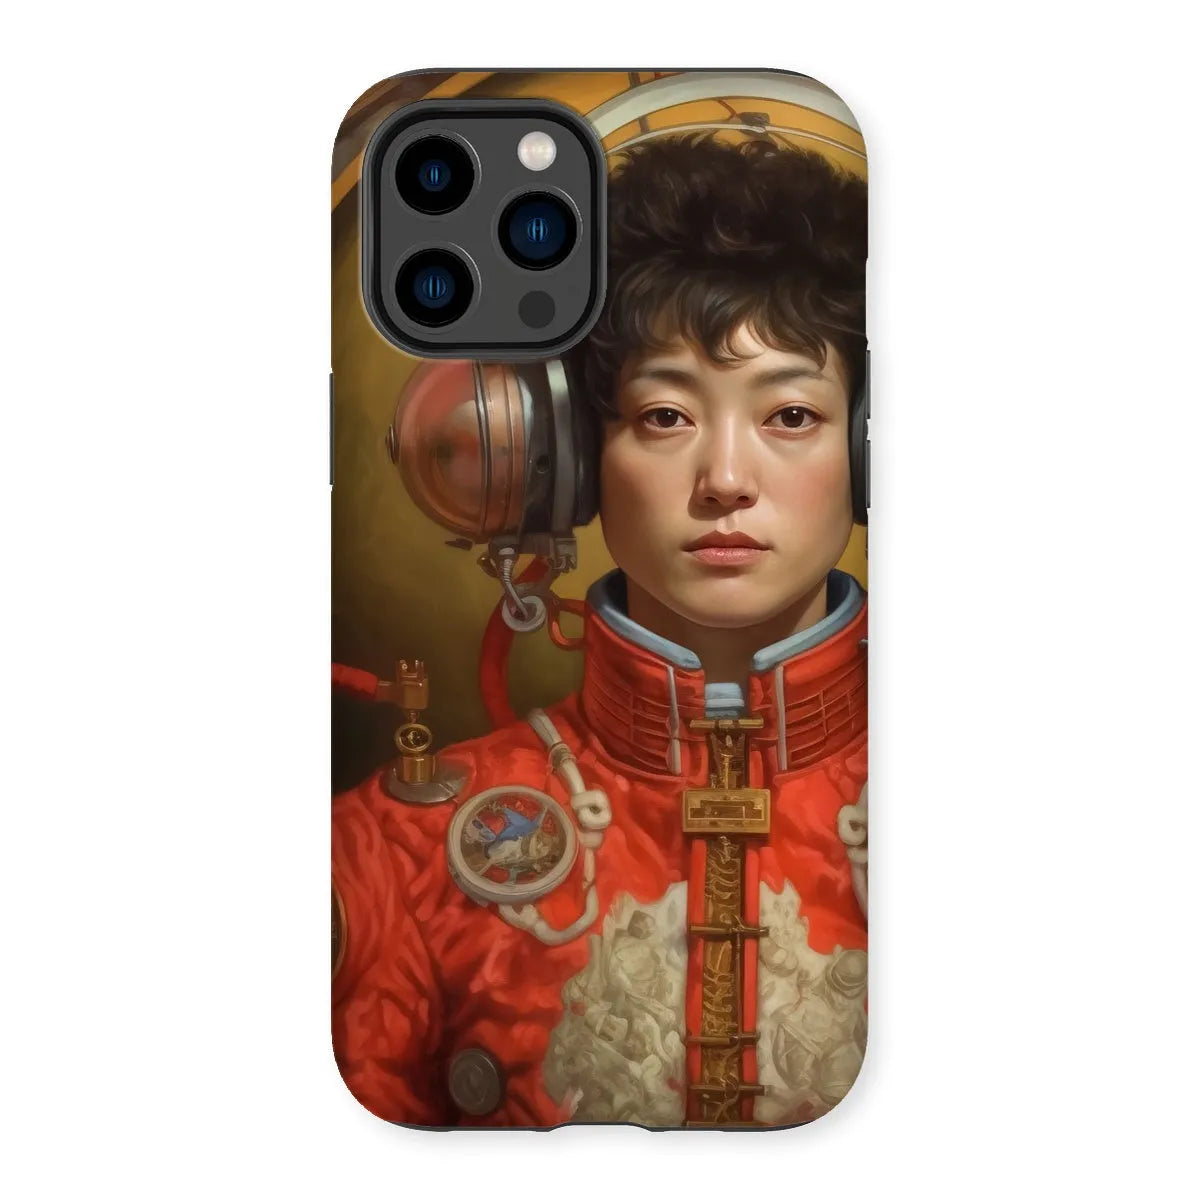 Mùchén - Gay Chinese Astronaut Aesthetic Phone Case - Iphone 14 Pro Max / Matte - Mobile Phone Cases - Aesthetic Art